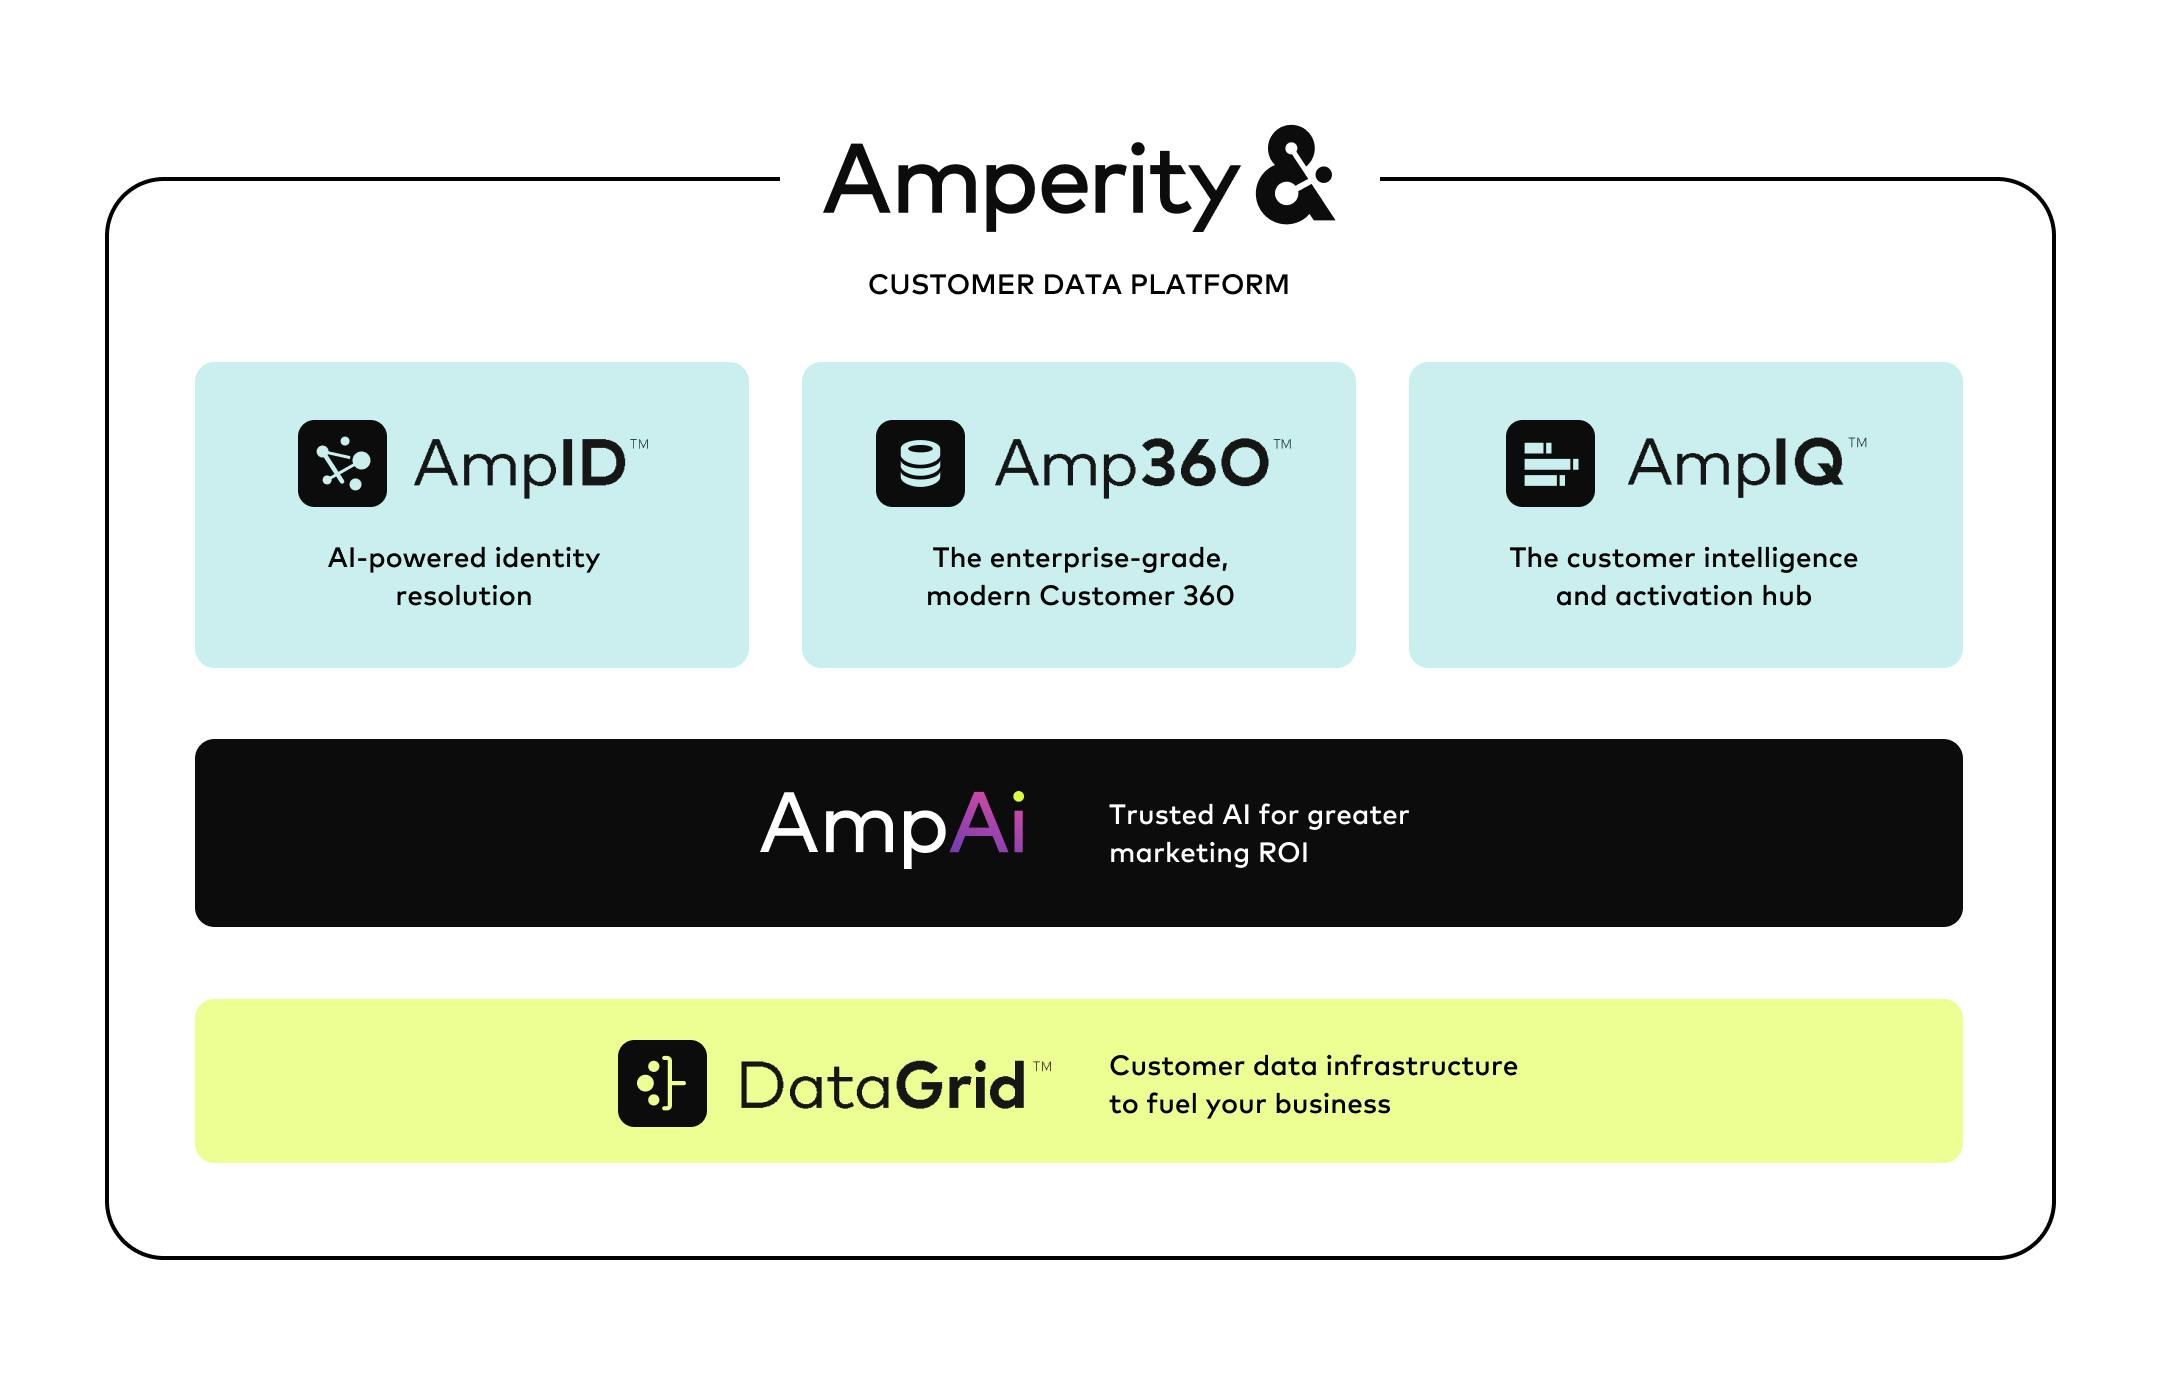 The Amperity customer data platform visualized as the products AmpID, Amp360, and AmpIQ stacked on top of AmpAI and DataGrid.